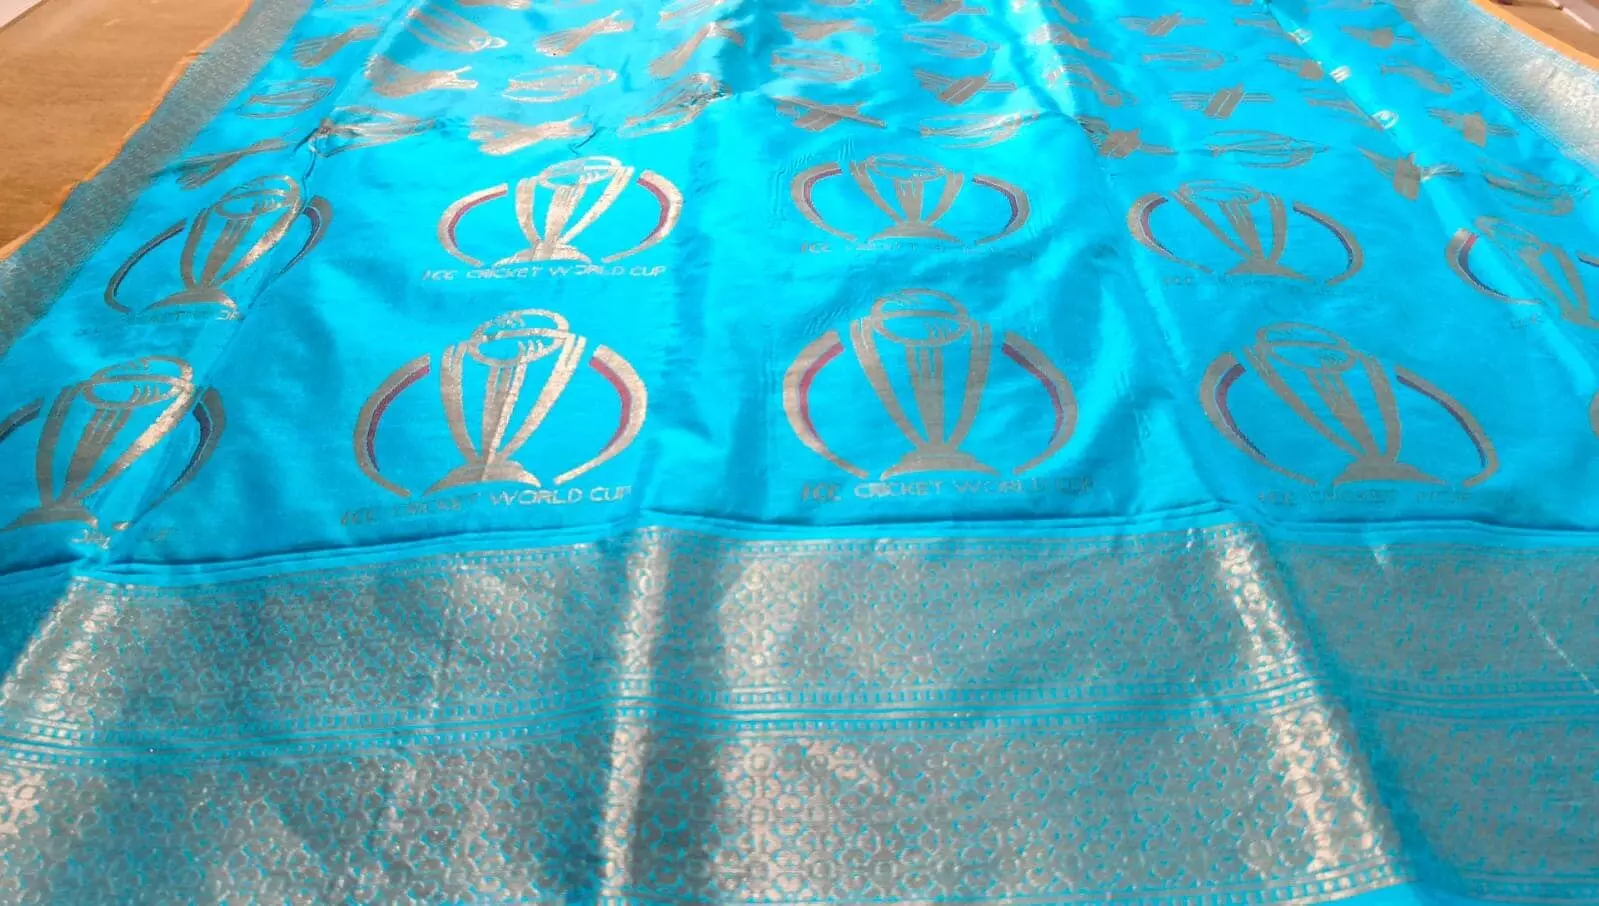 Wives of Indian players will get Banarasi saree after winning the World Cup